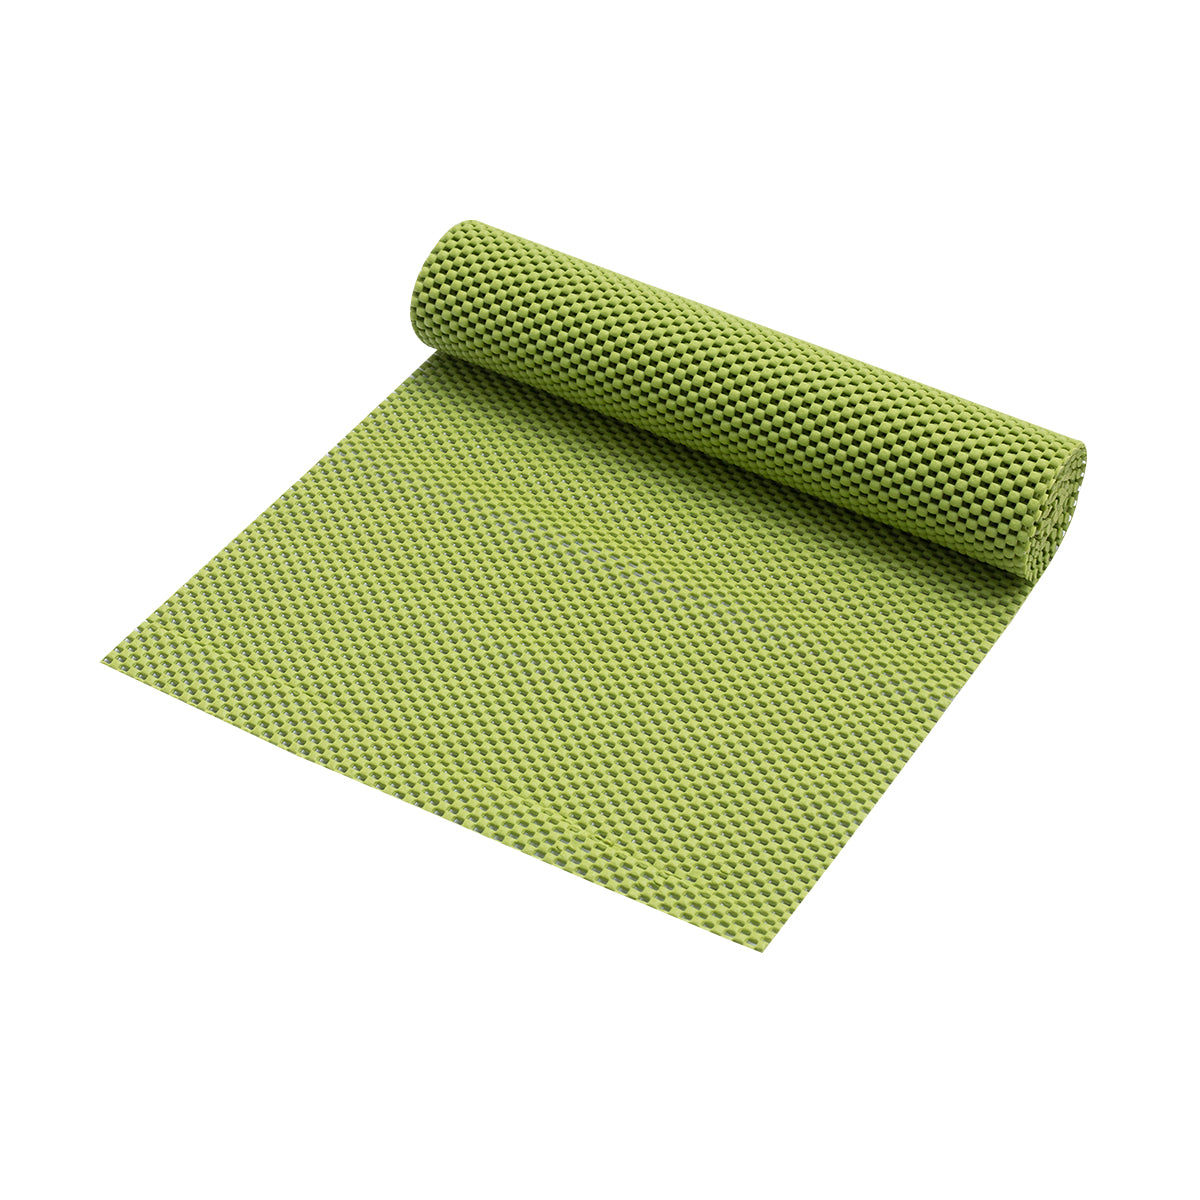 RAY STAR Premium Green Drawer and Shelf Liner, Strong Grip, Non